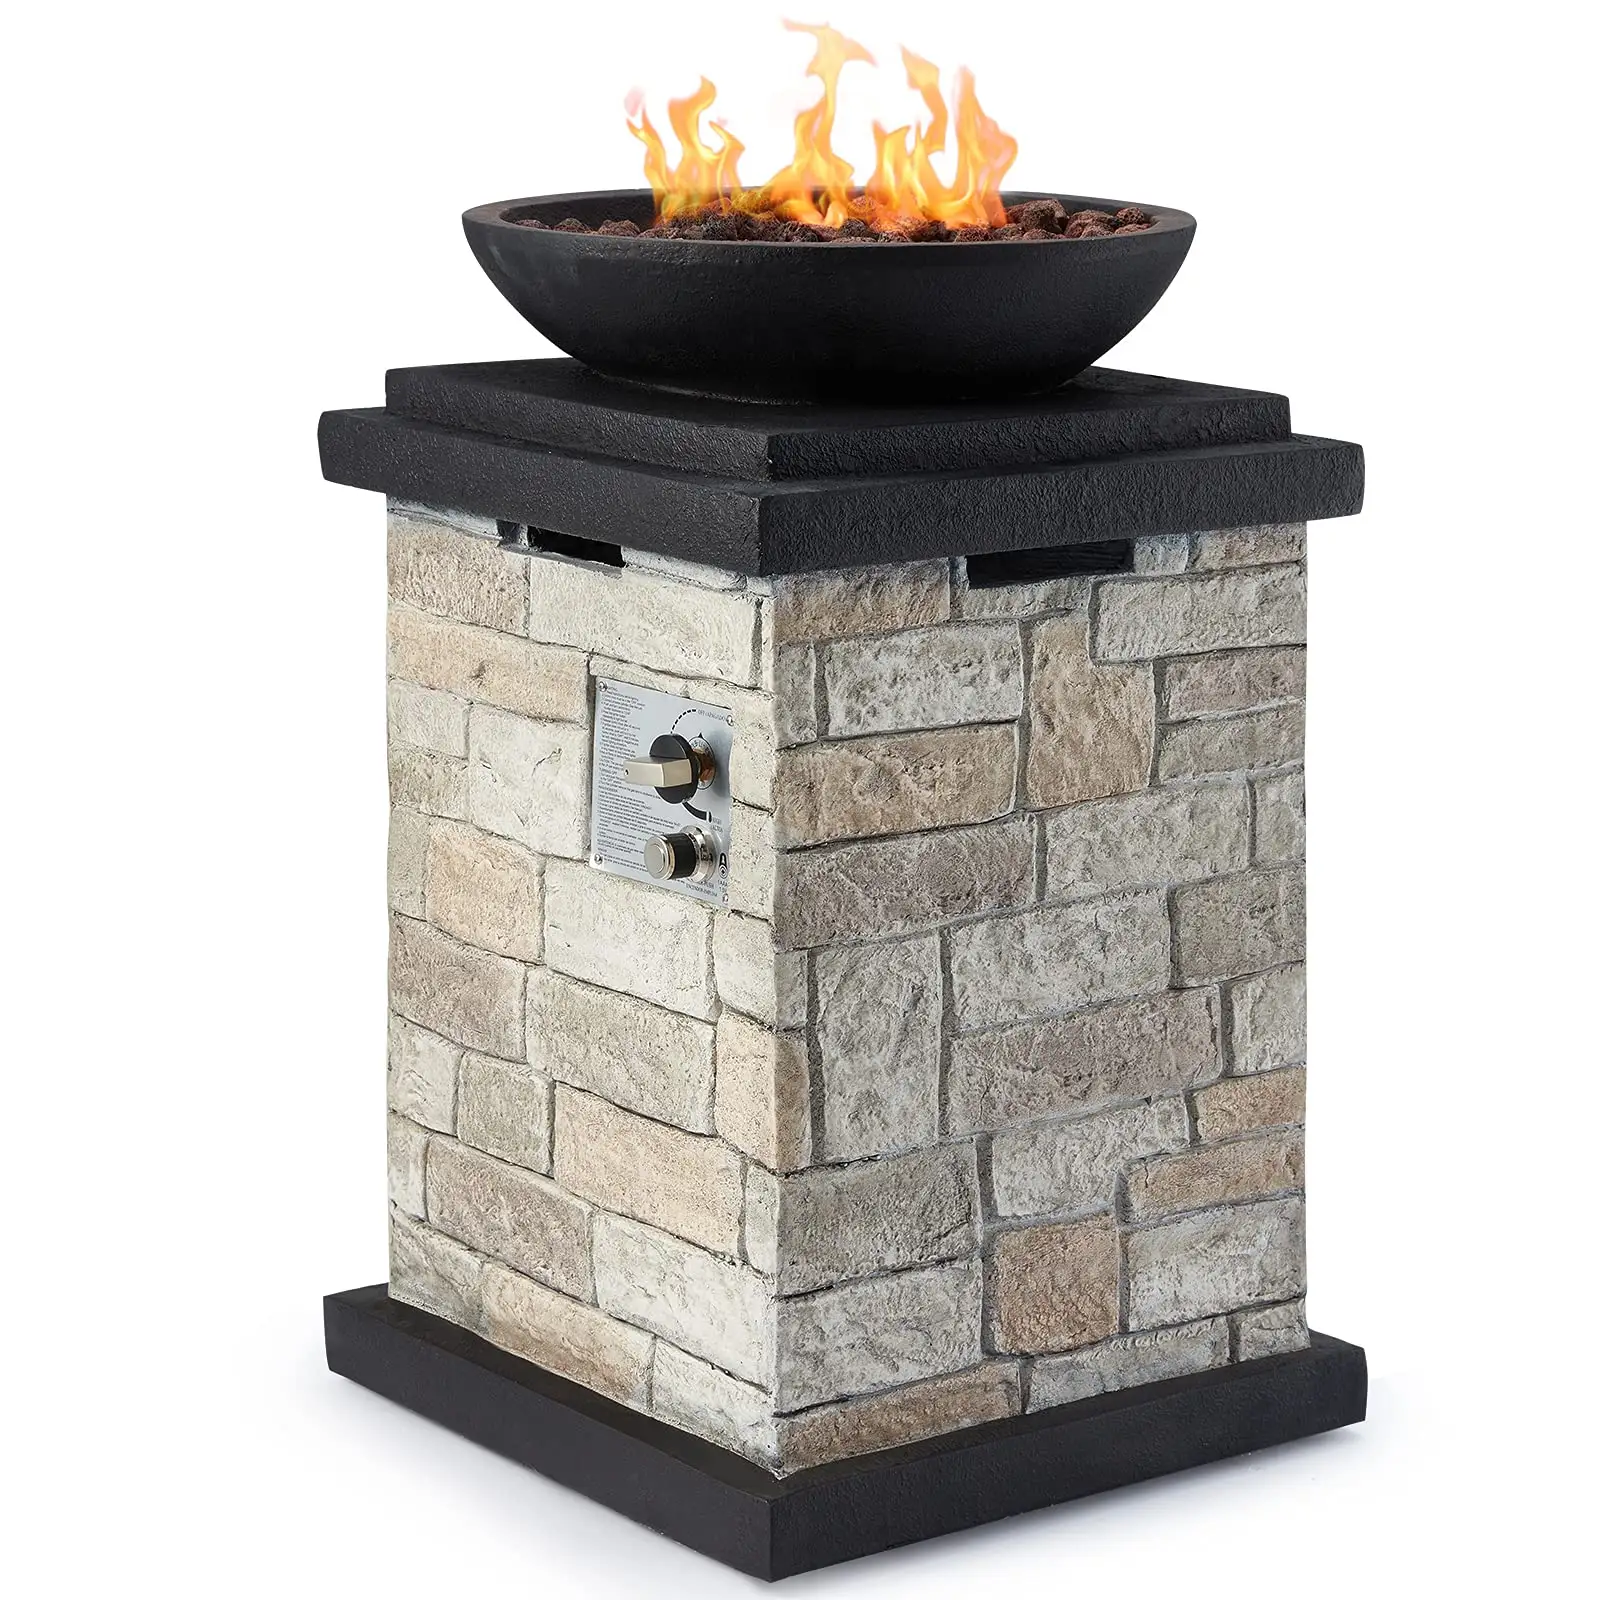 Propane Firebowl Column, 40000 BTU Outdoor Gas Fire Pit, Compact Ledgestone Firepit Table with Lava Rocks and Rain Cover